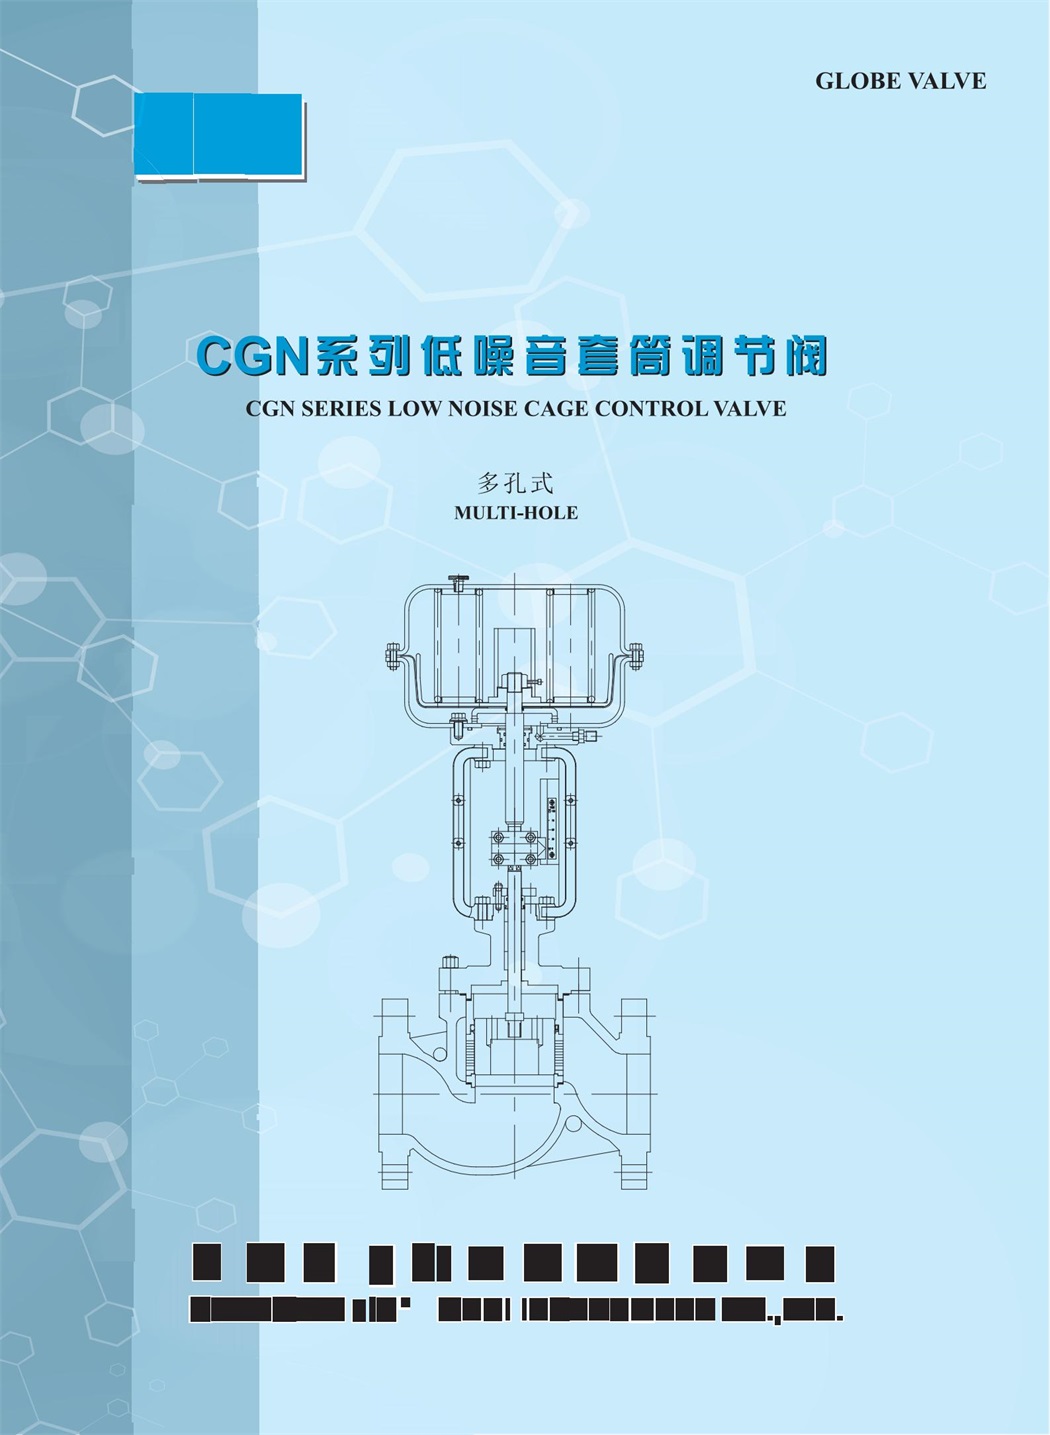 CGN Series Low Noise Cage Control Valve